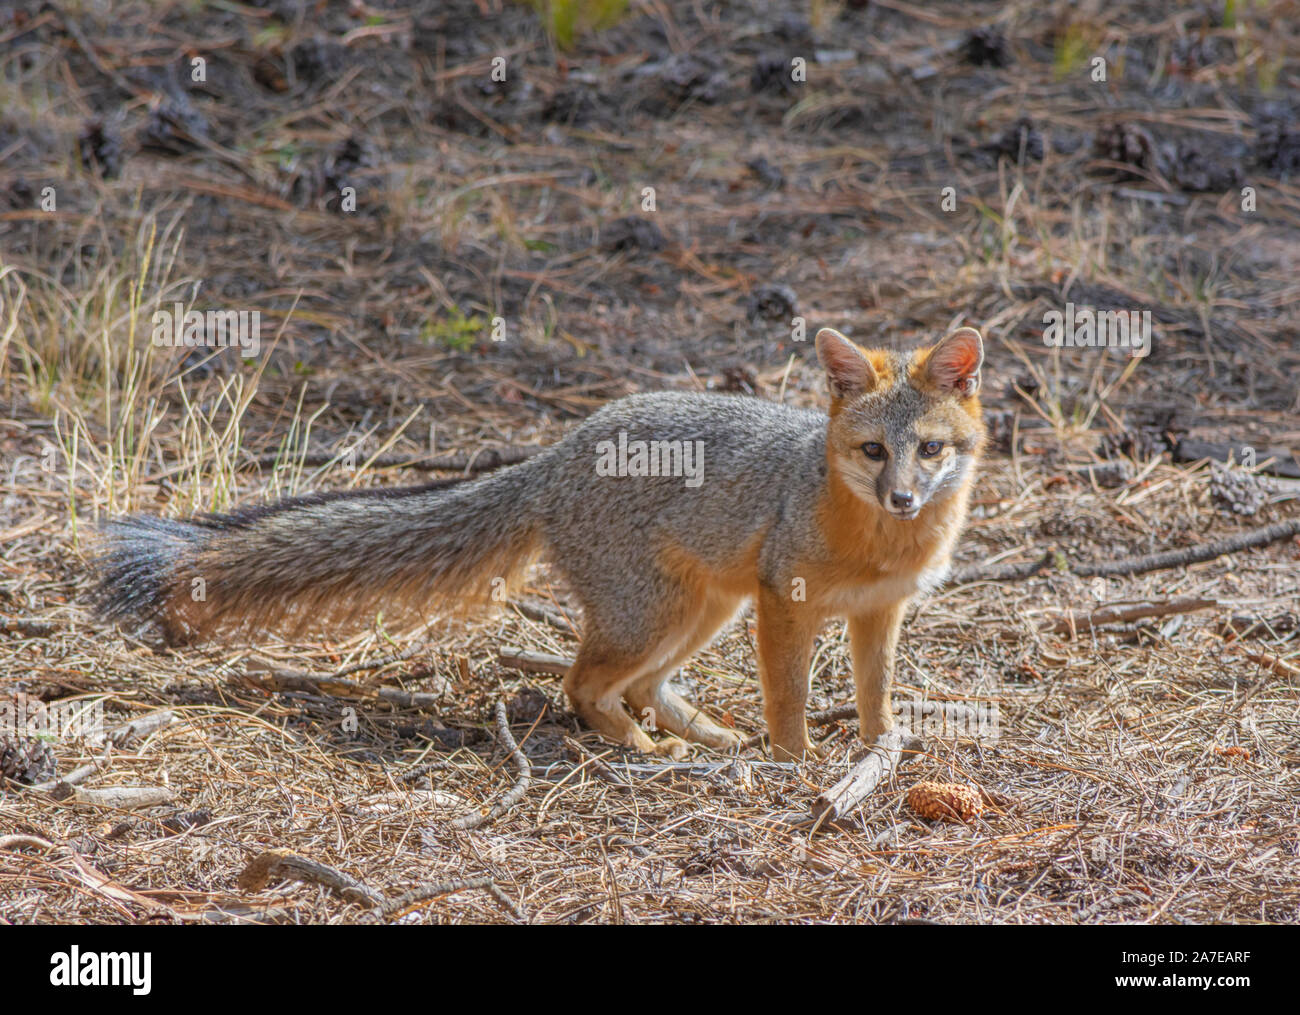 Young Gray Fox or Grey Fox (Urocyon cinereoargenteus), eyes photographer in the Pike National Forest Colorado USA. Photo taken in October. Stock Photo